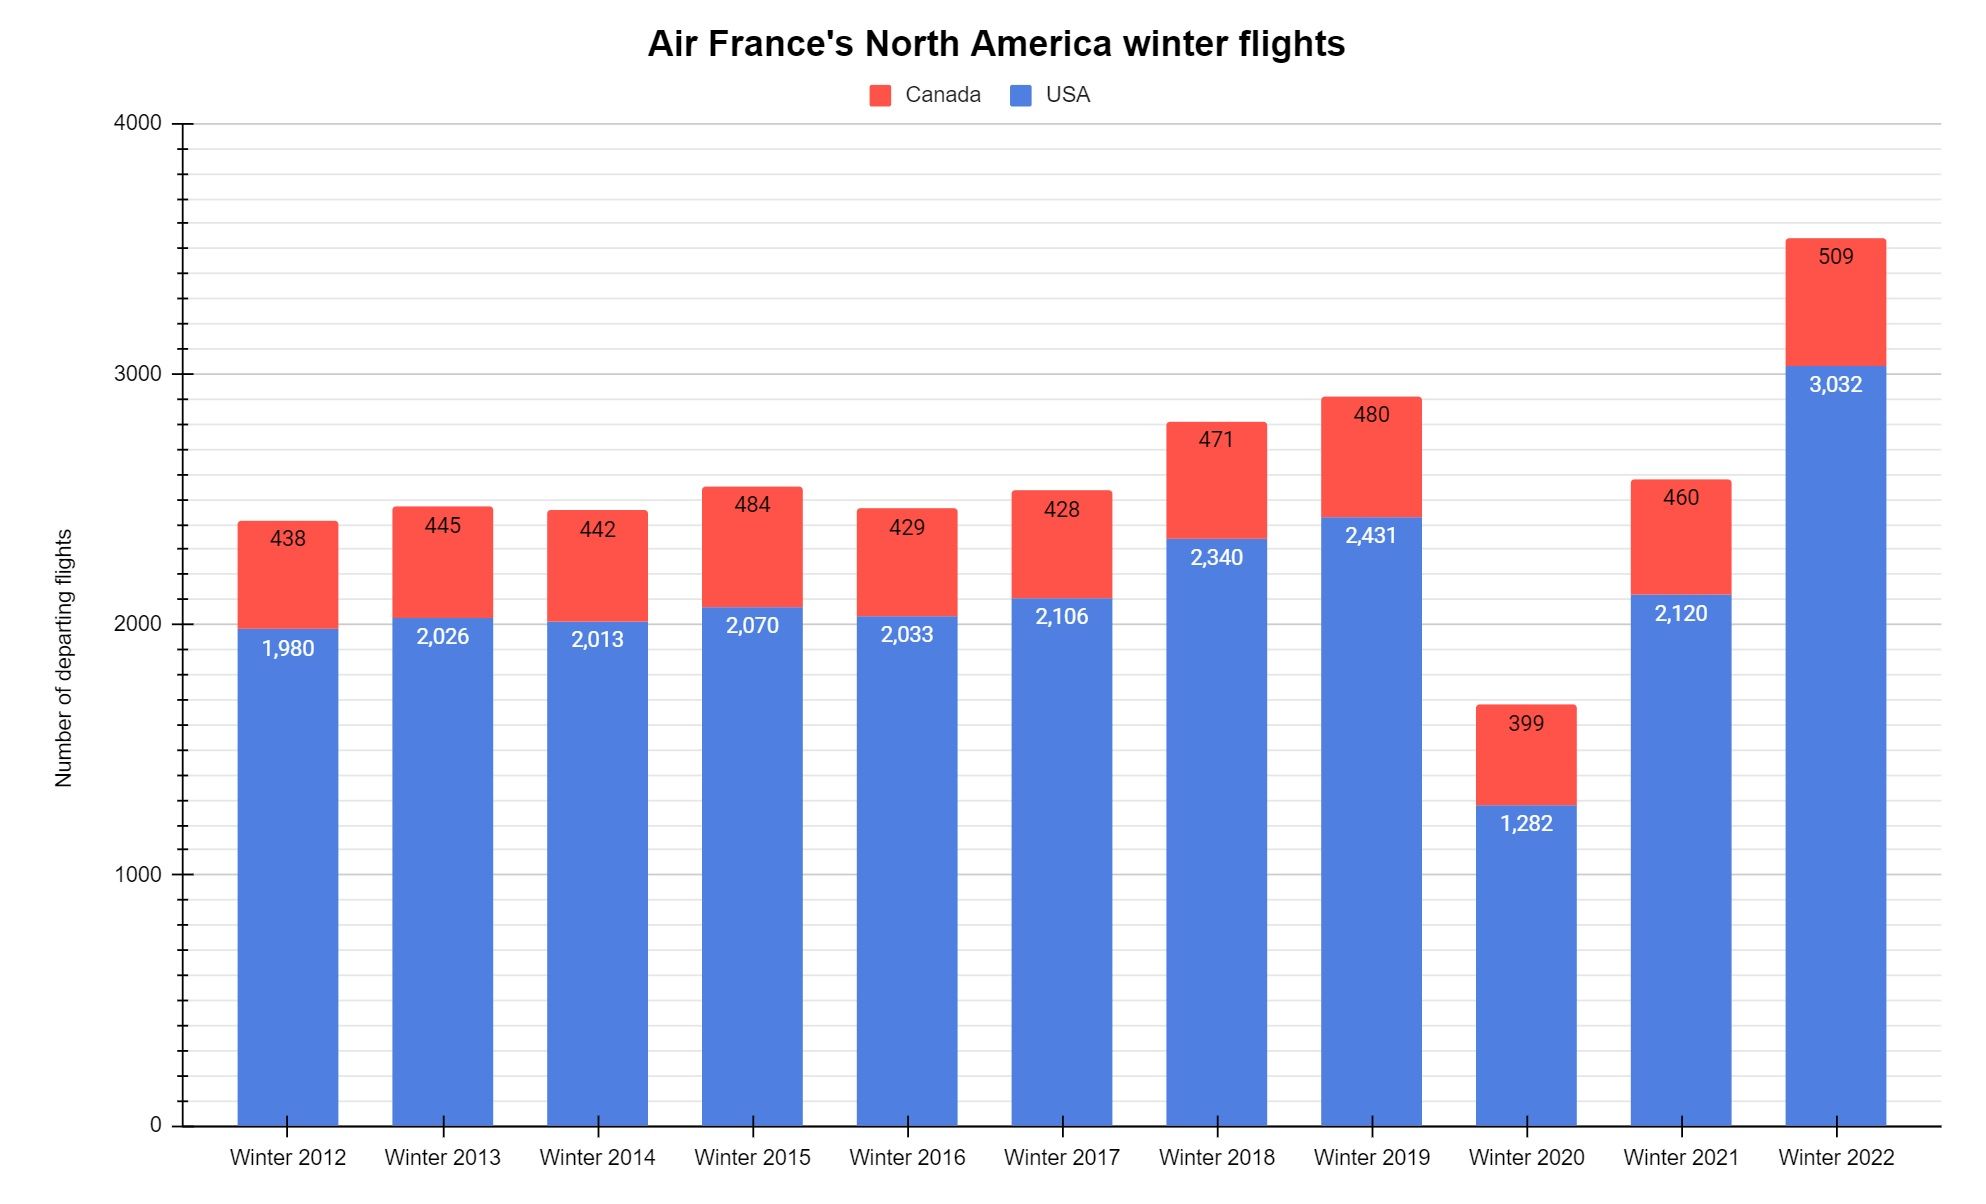 Air France winter flights to the US and Canada